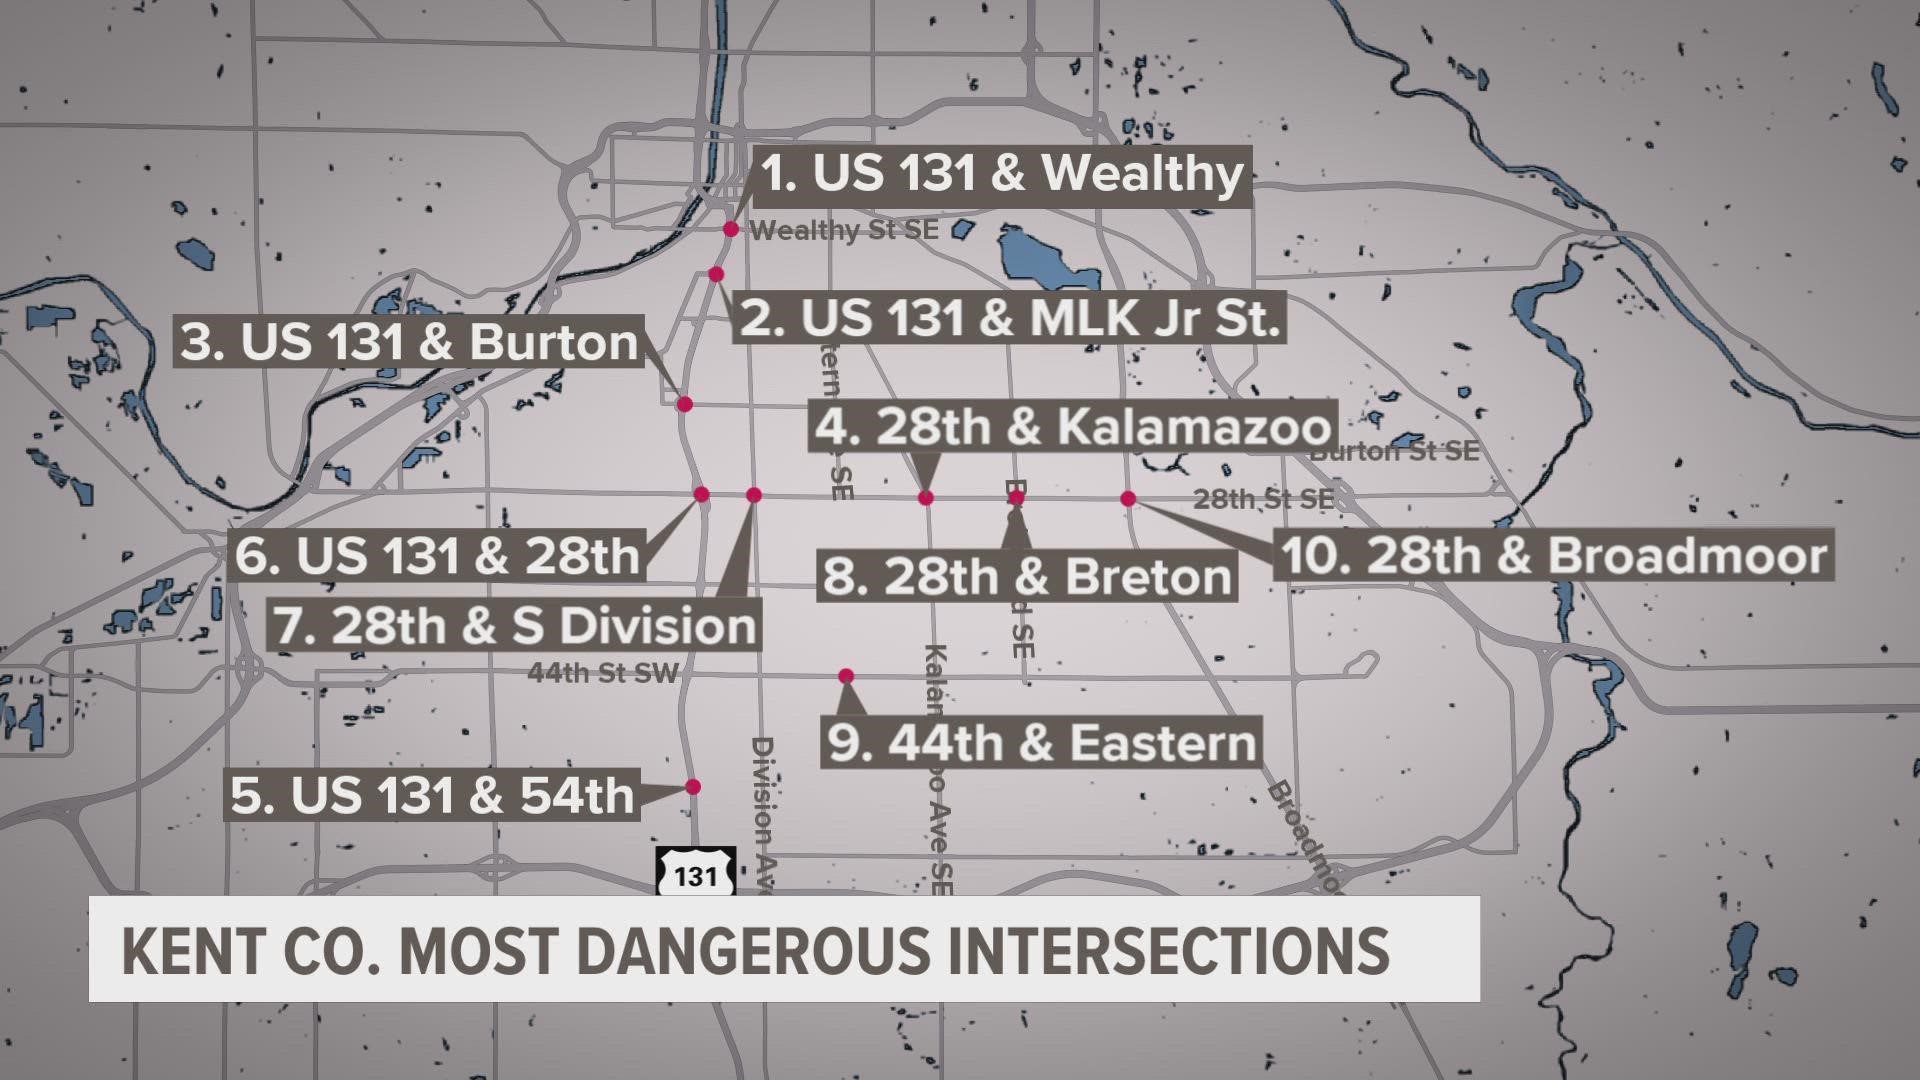 One intersection in Grand Rapids has topped the list as the most dangerous intersection for six years straight.